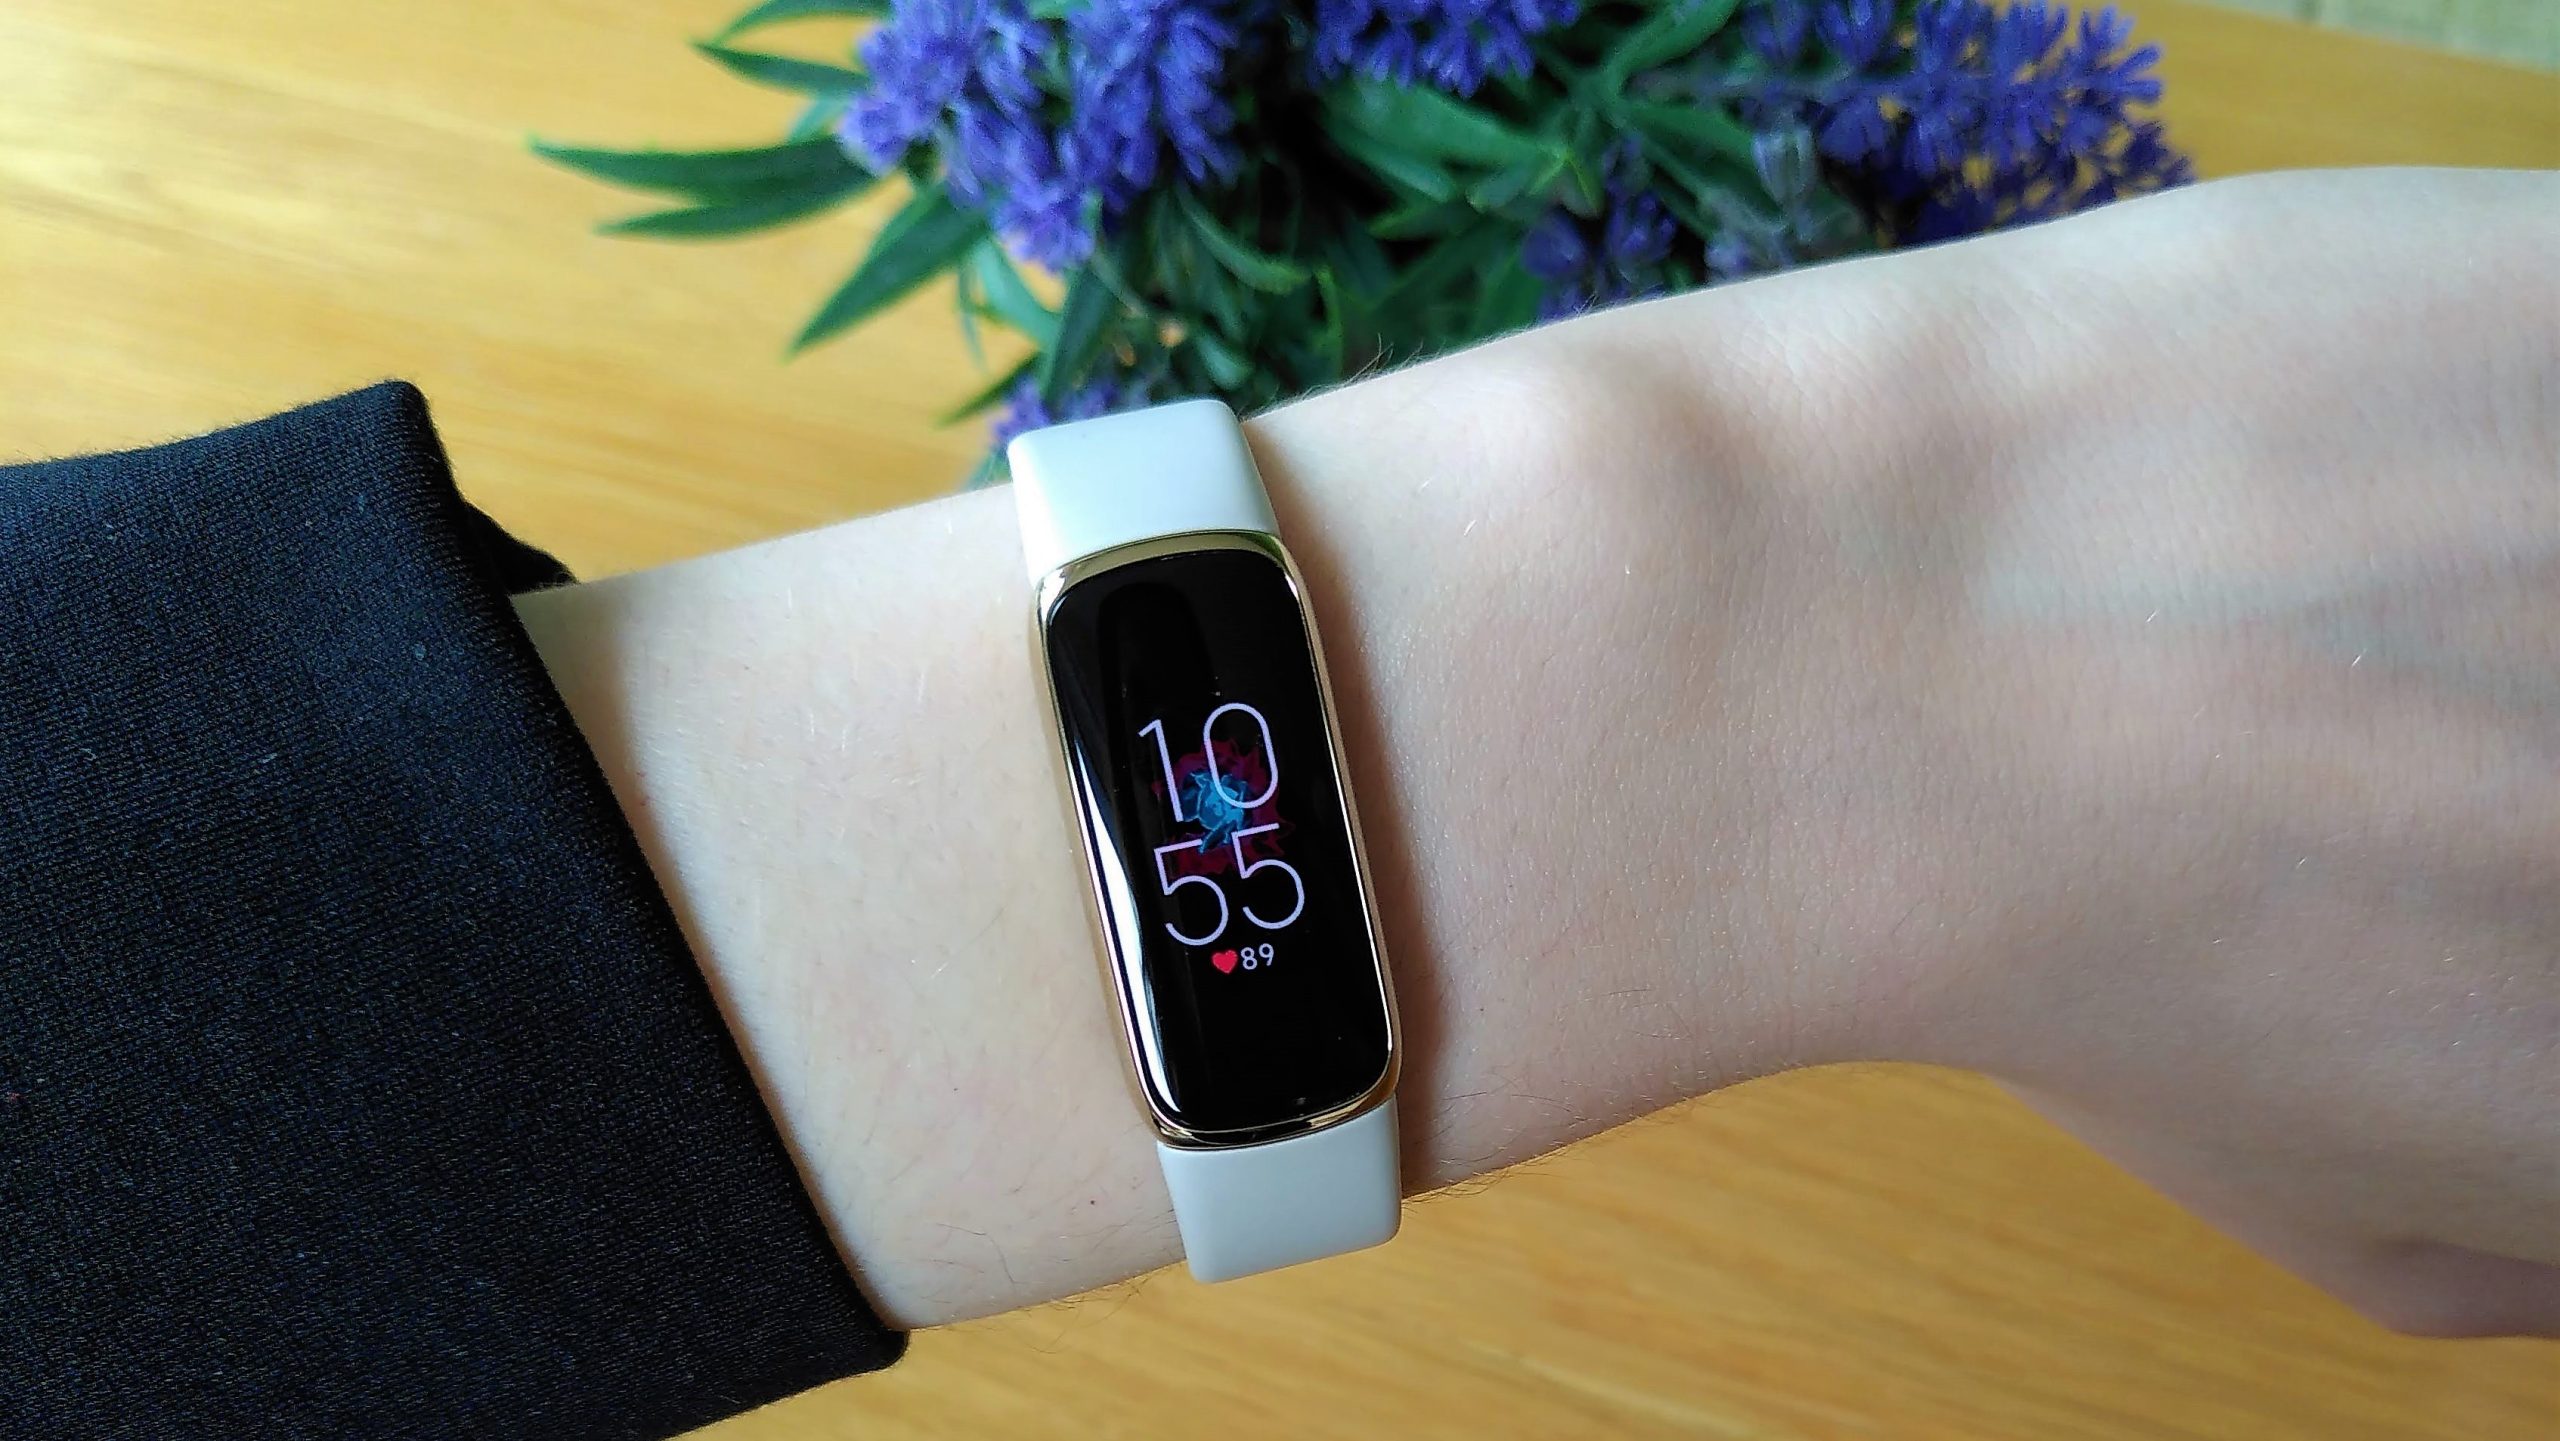 Fitbit Luxe 2